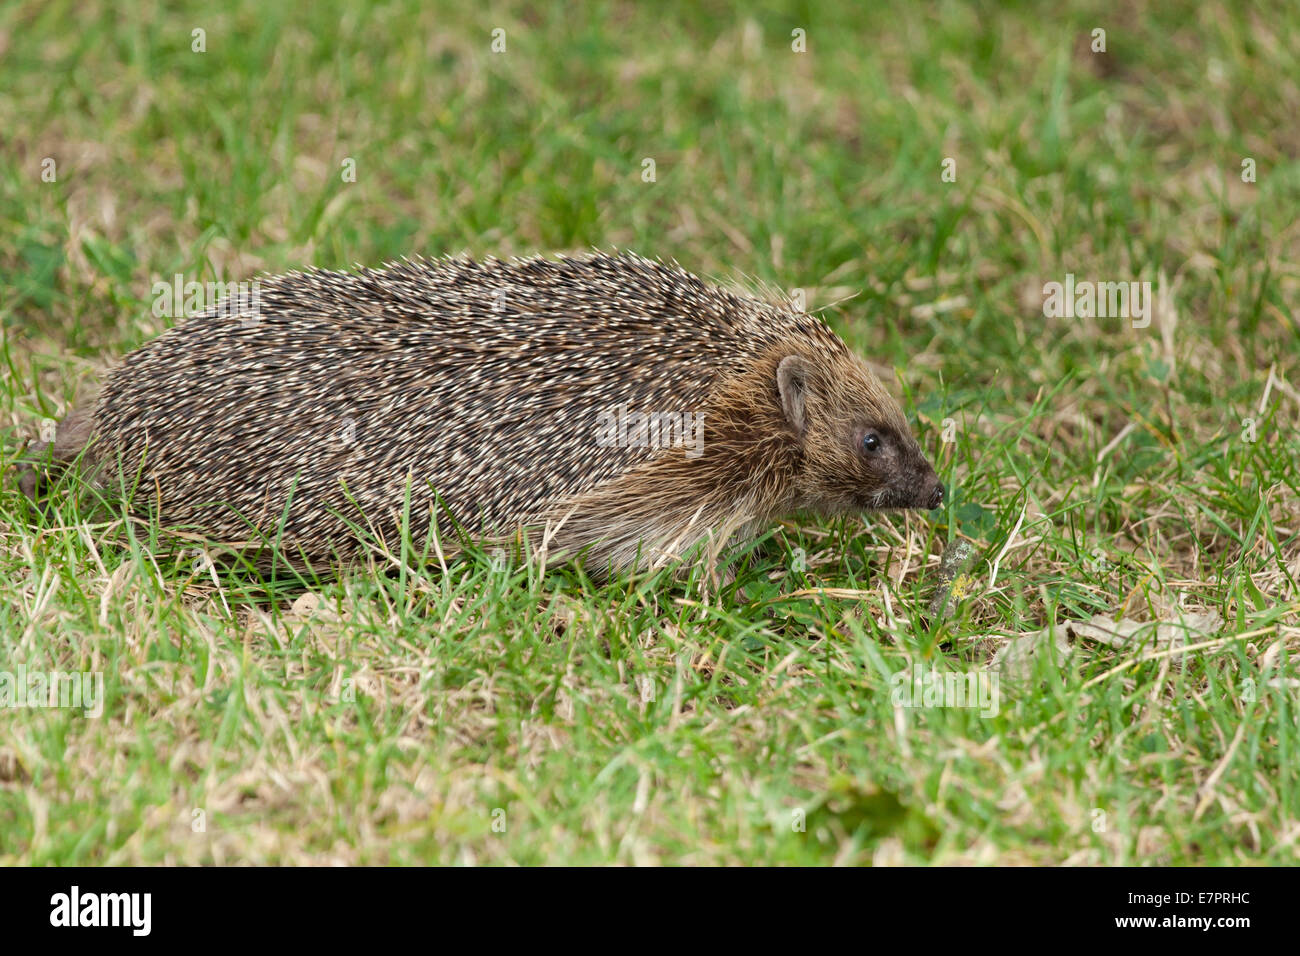 Full front side view of the body and head of a hedgehog walking in long grass Stock Photo